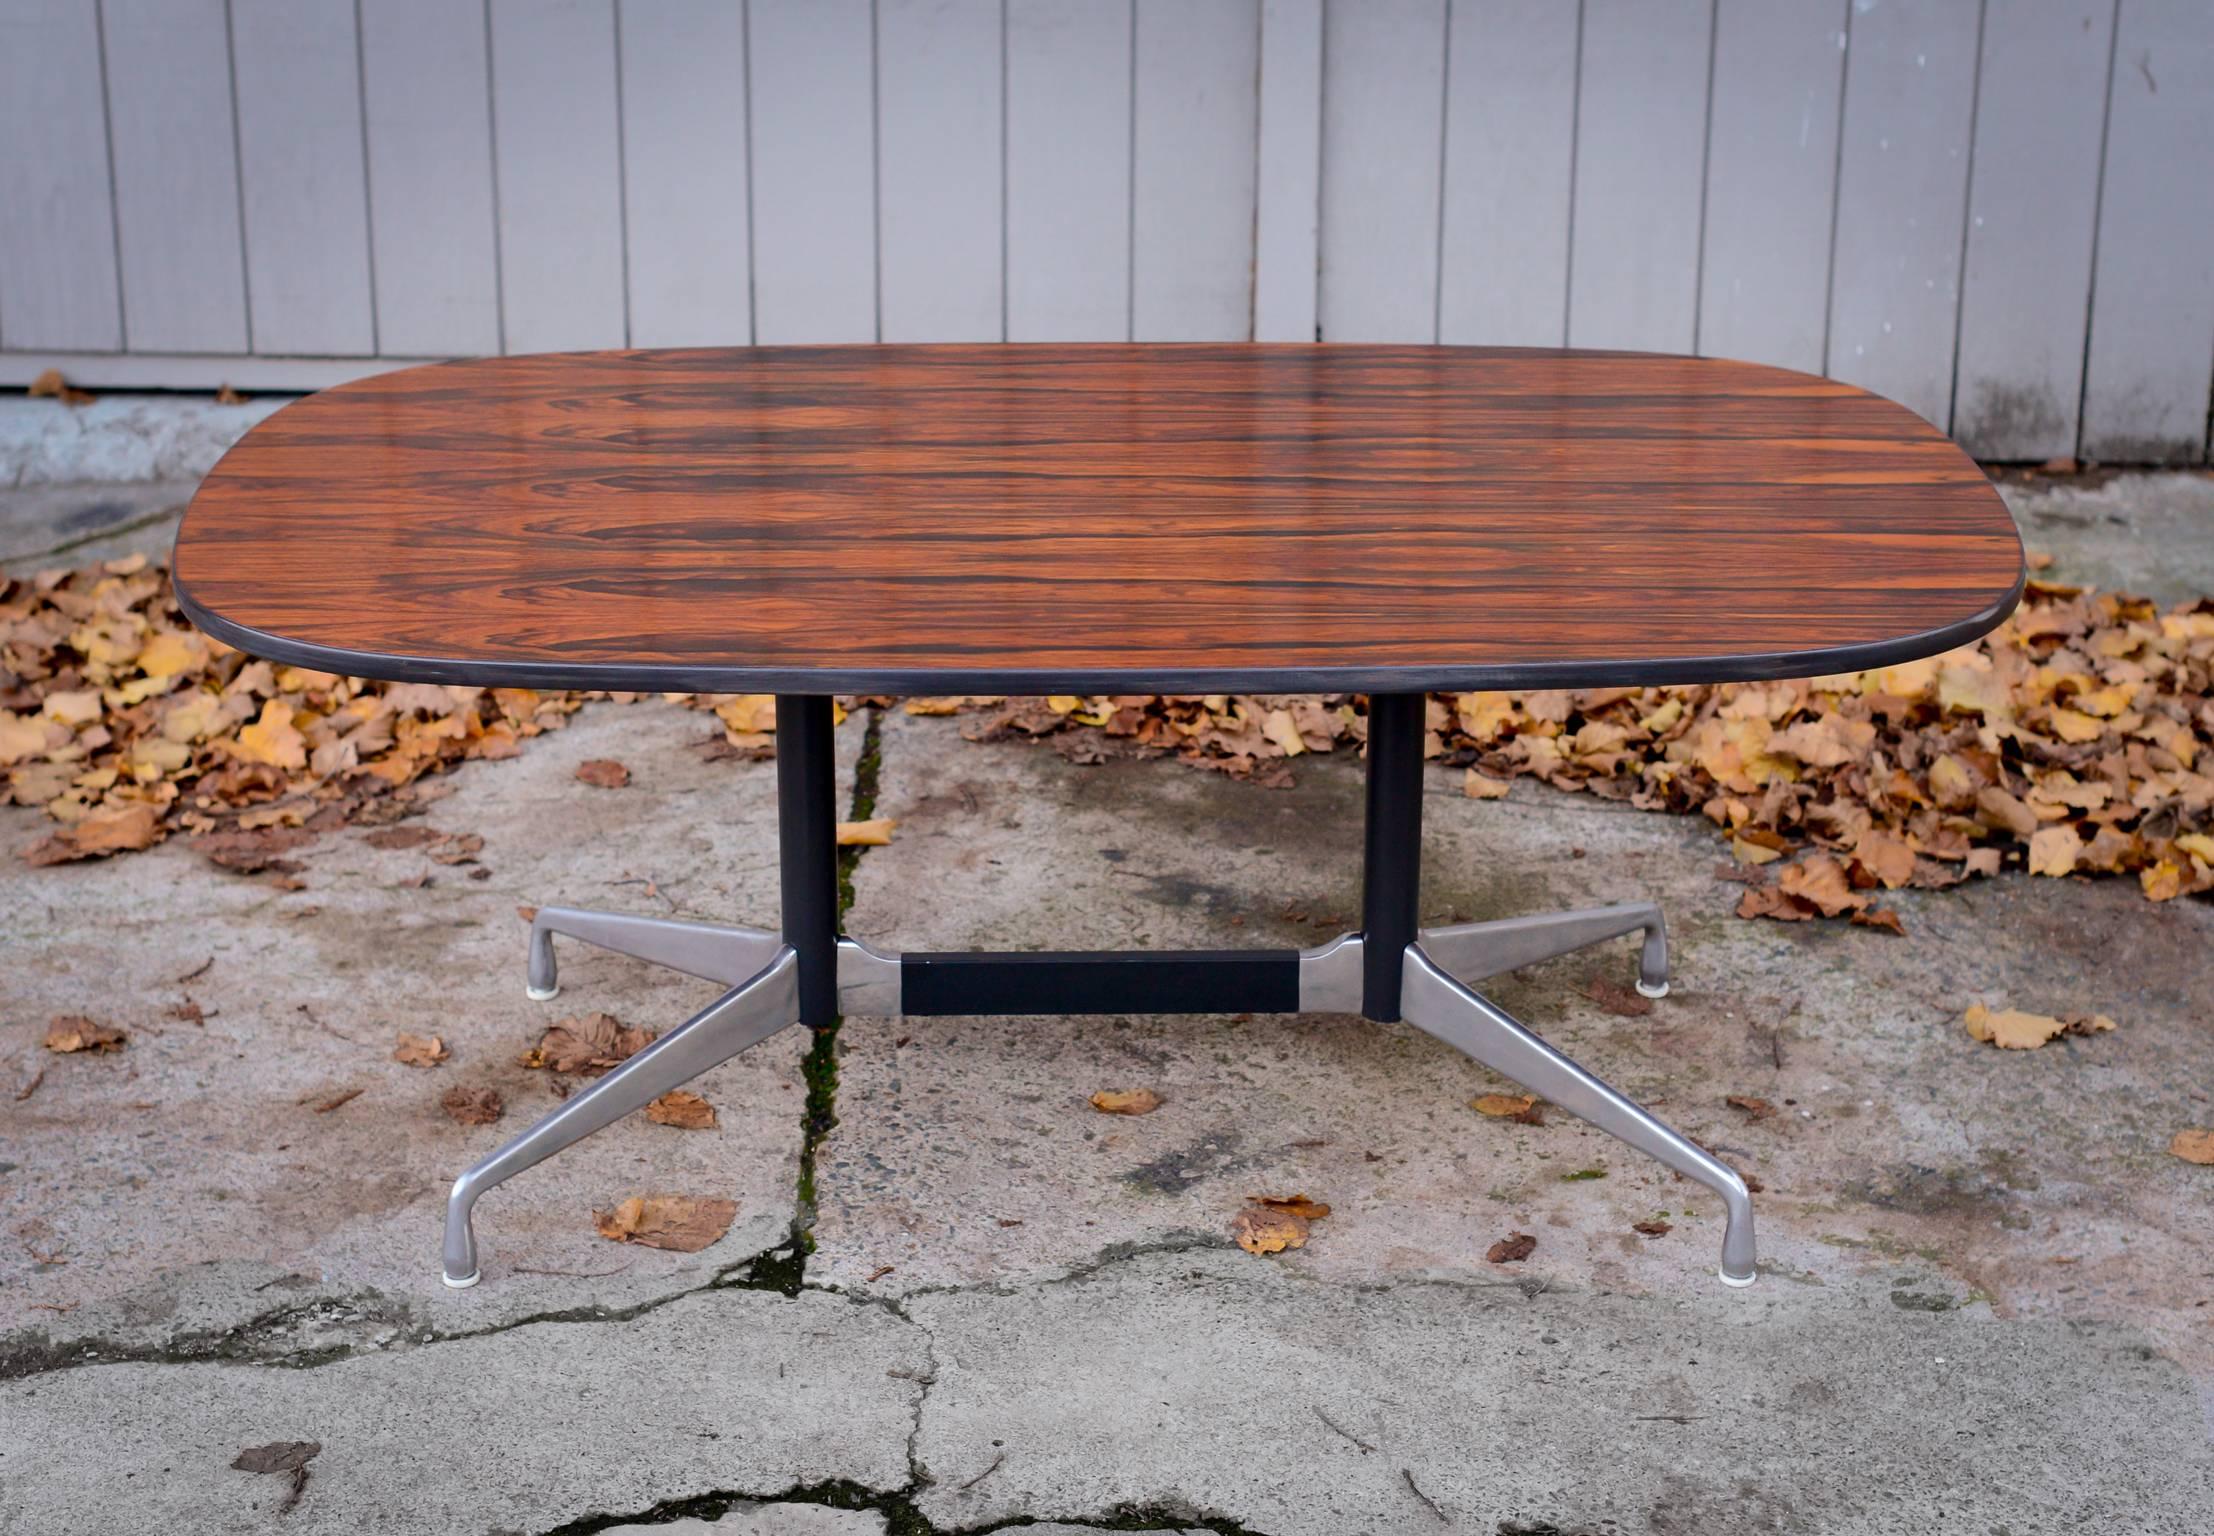 Eames segmented base aluminum group table for Herman Miller, 1964.
Dining/conference/writing table with Rosewood top and extruded,
aluminum base.
Eames segmented base/aluminum group table for Herman Miller 1964. 
Out of production lozenge